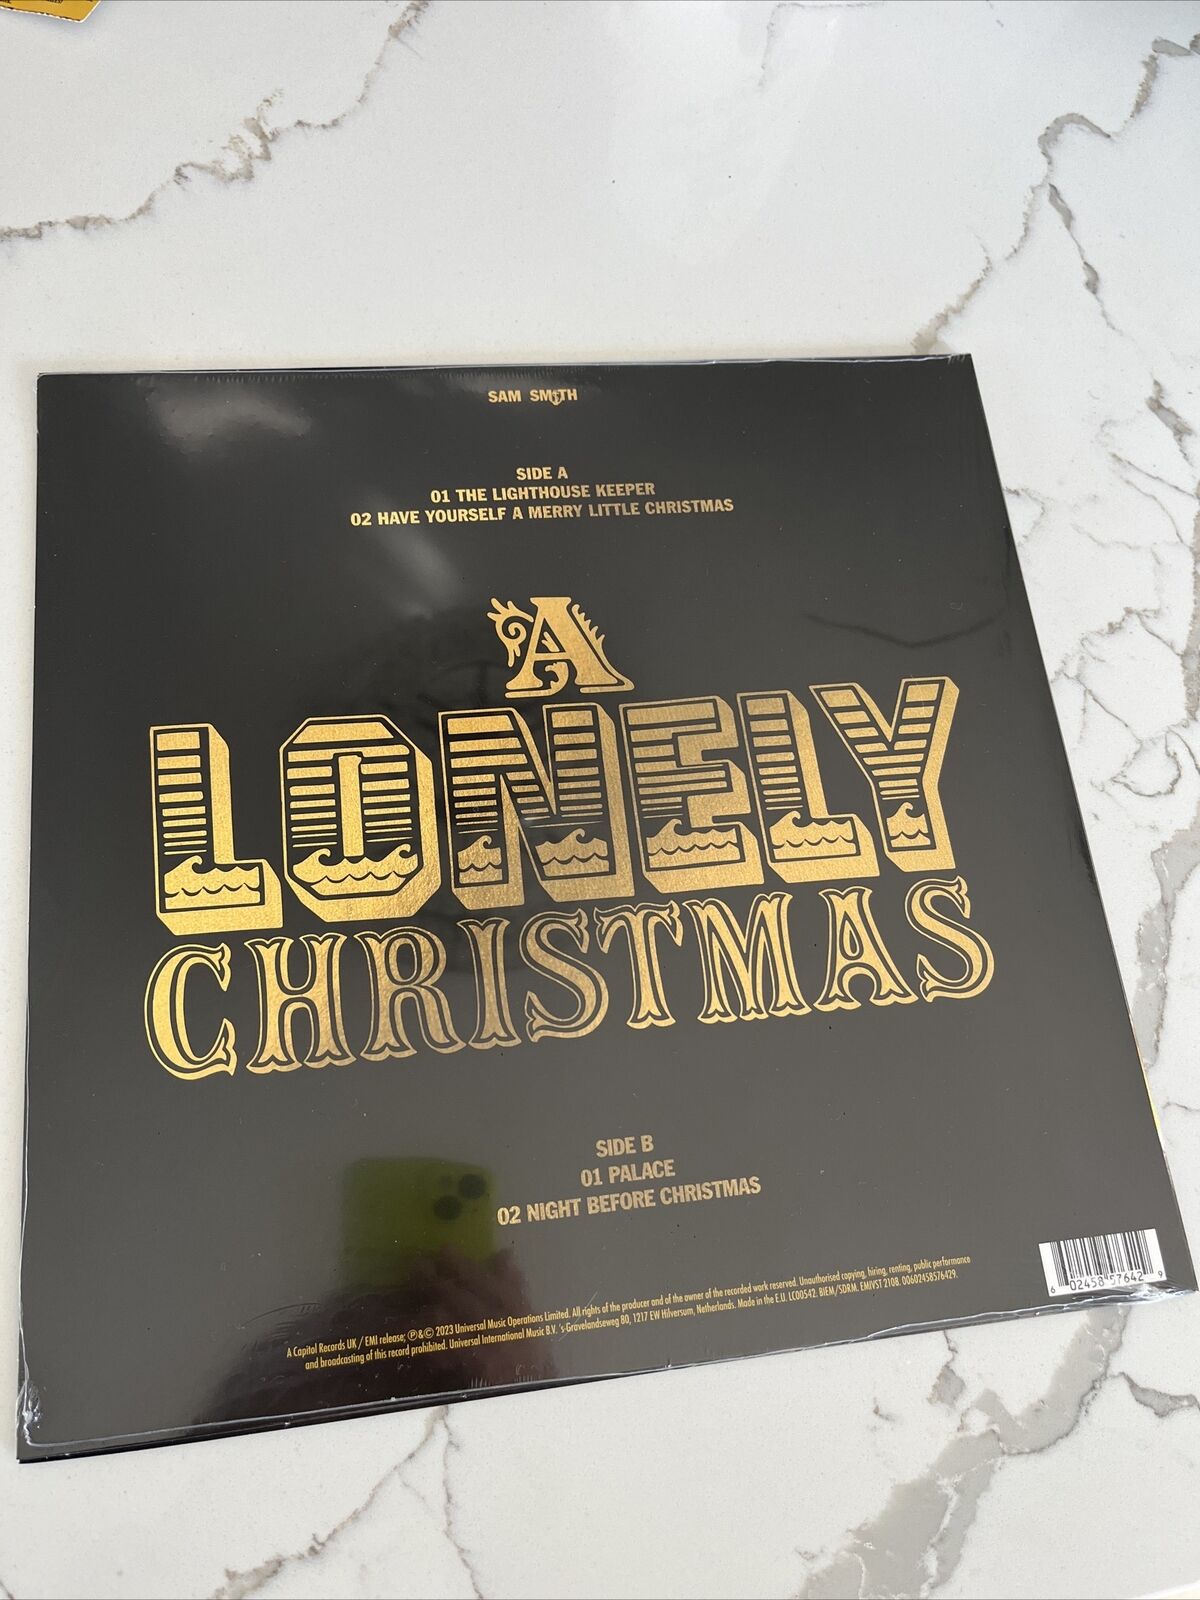 Sam Smith - A Lonely Christmas SPOTIFY Fans First WHITE Vinyl Record EP